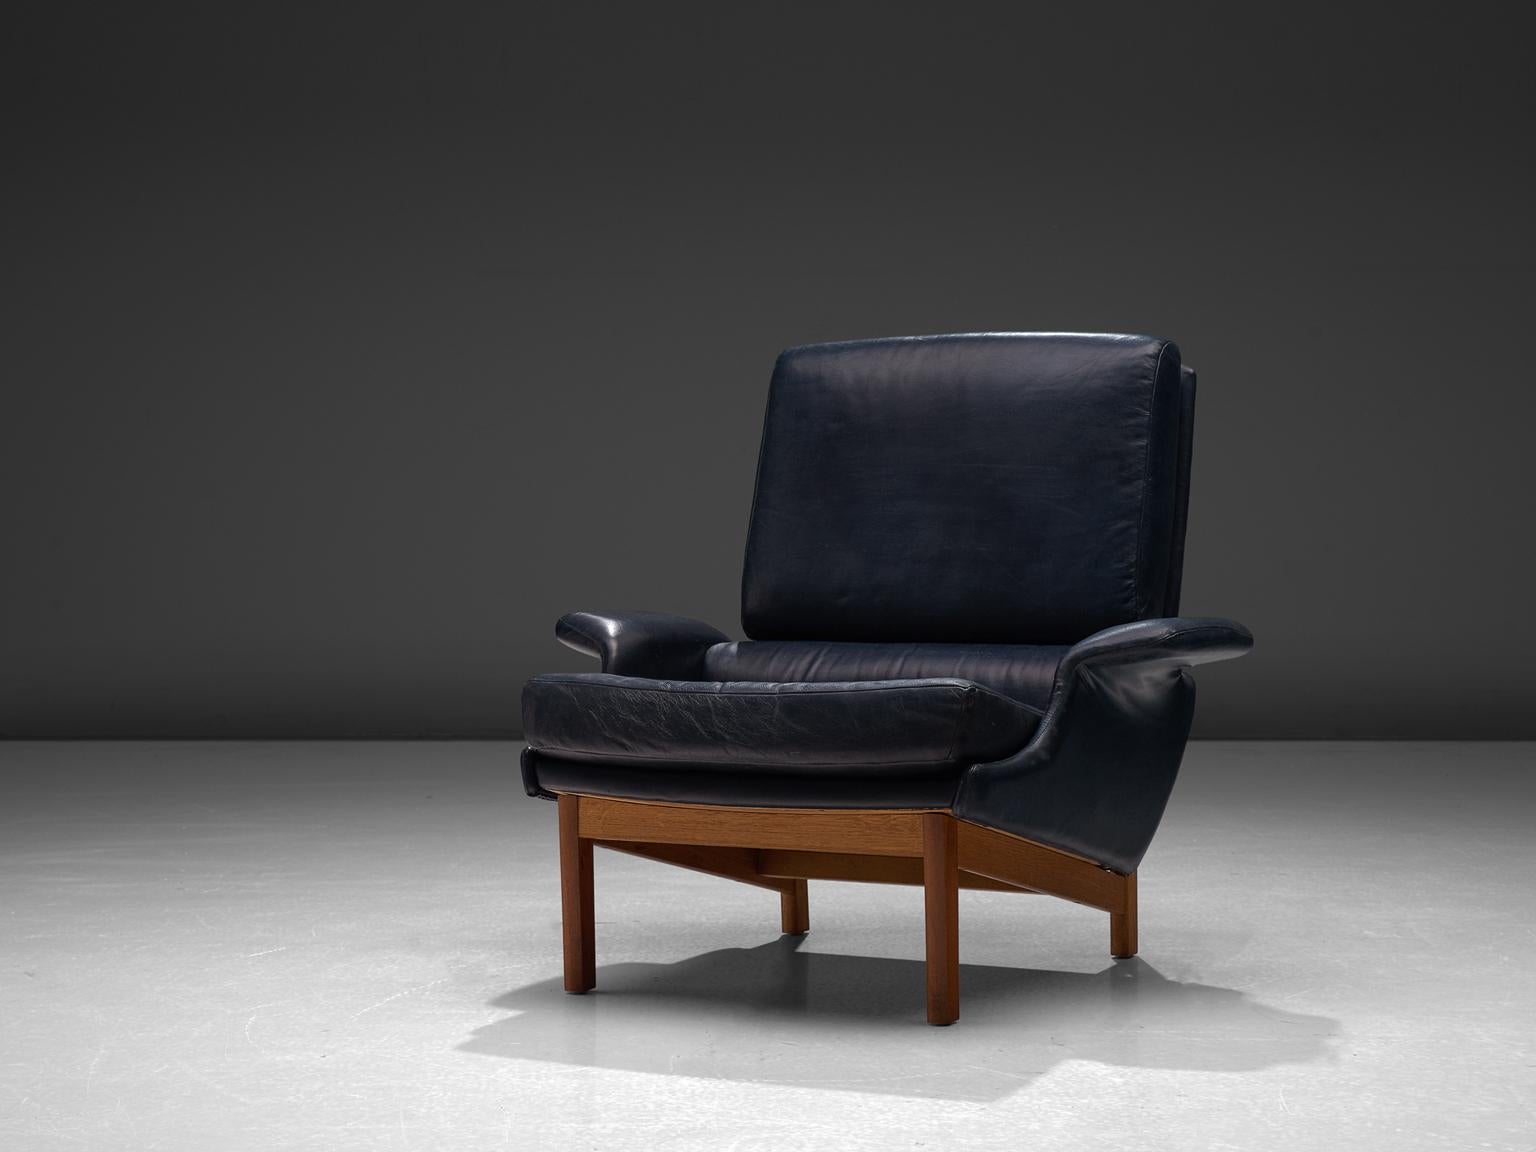 Adam lounge chair, in leather and teak, by Ib Kofod-Larsen for Mogens Kold Møbelfabrik, Denmark, 1958.

This extraordinary and very comfortable set of lounge chairs have a tight and clean body with the folded well known 'wing' armrests. The cushions